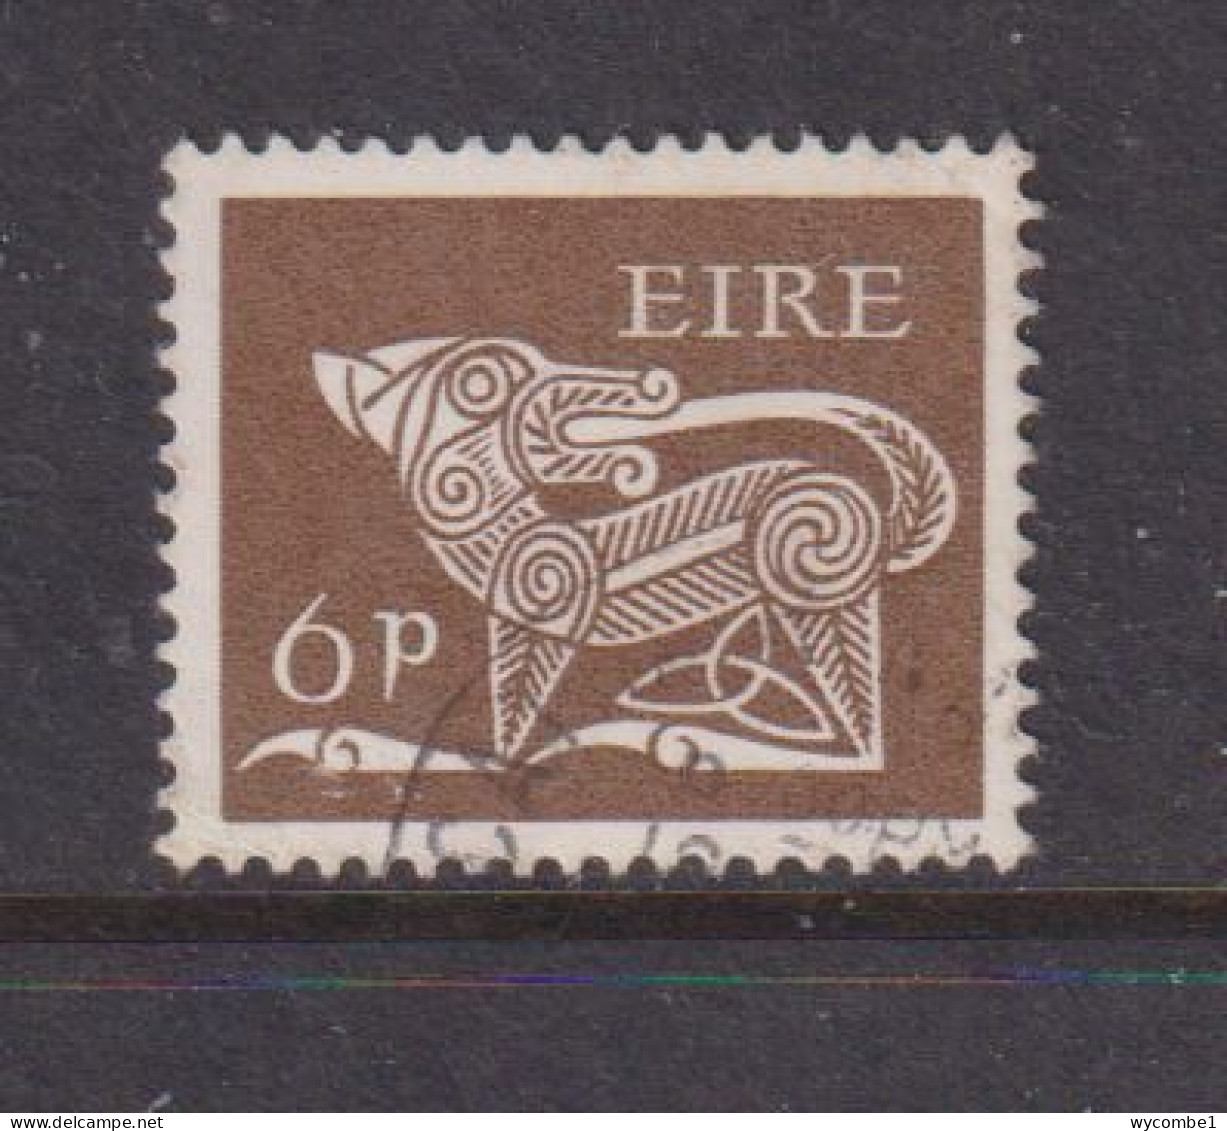 IRELAND - 1968  Definitives  6d  Used As Scan - Used Stamps